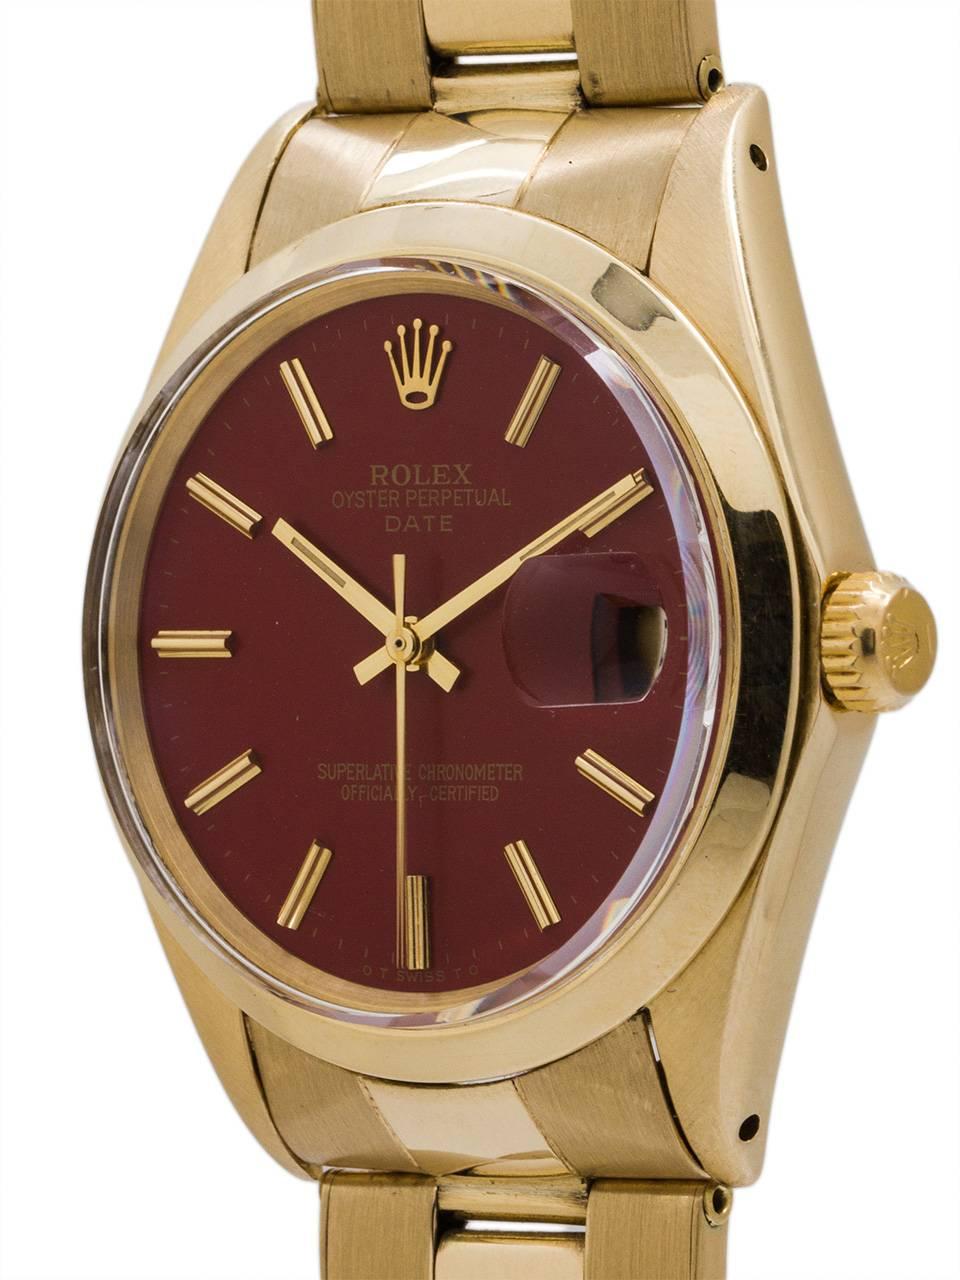 
Rolex 14K YG Man’s Oyster Perpetual Date ref 1503 serial#2.08 million circa 1969.  Featuring a 34mm diameter  case with 14K YG smooth bezel with acrylic crystal and beautiful “brick red” color dial with applied gold indexes and gilt hands. Powered